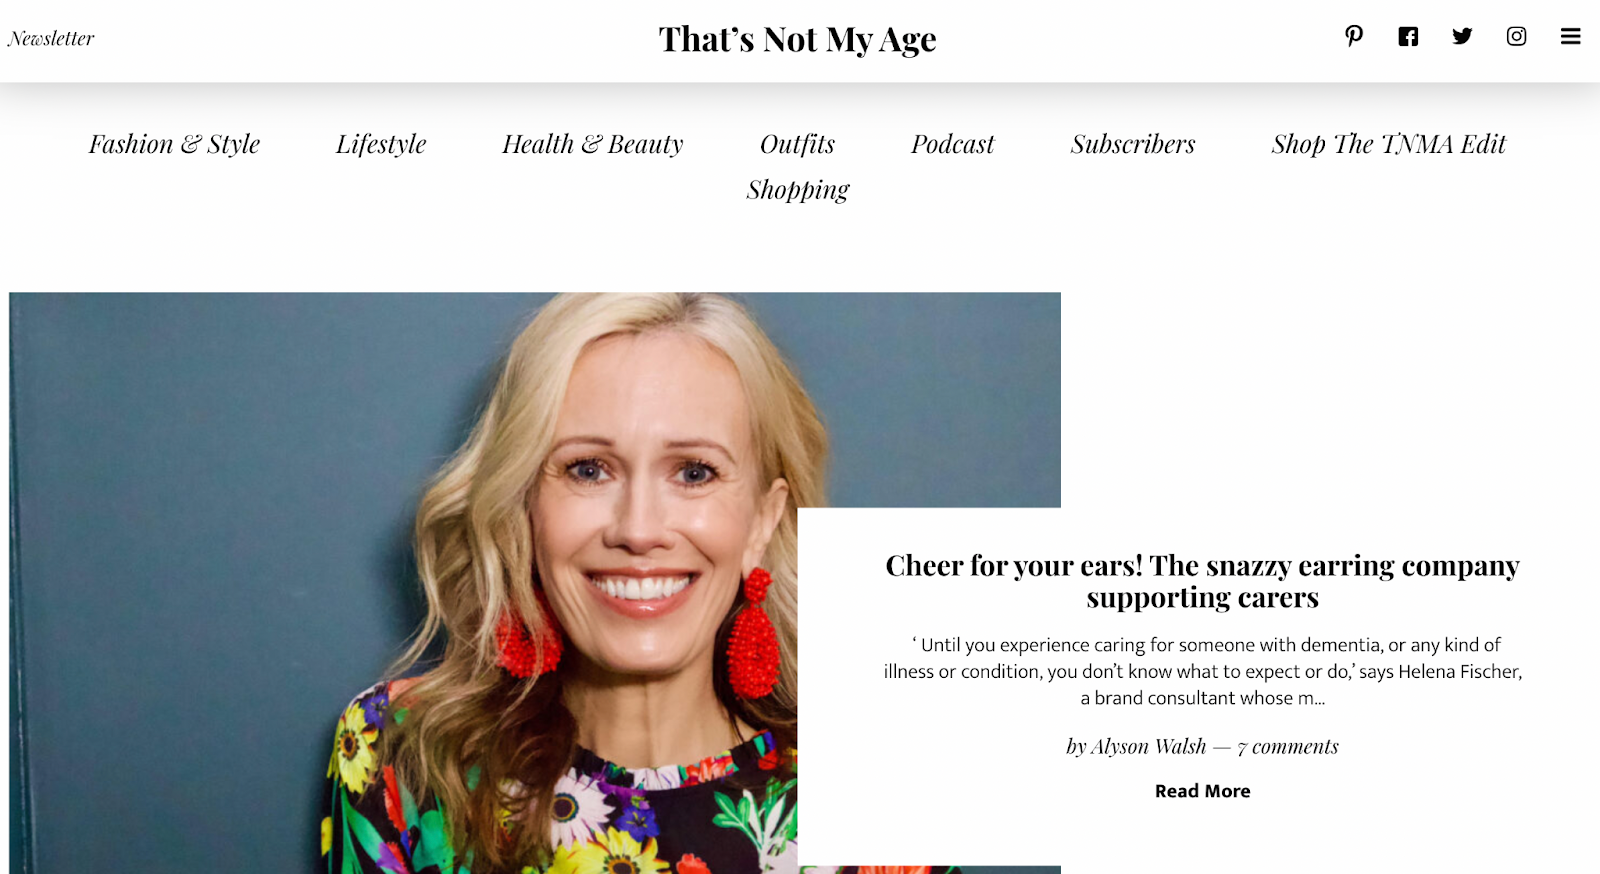 The Best Gifts for Women of All Ages - 50 IS NOT OLD - A Fashion And Beauty  Blog For Women Over 50